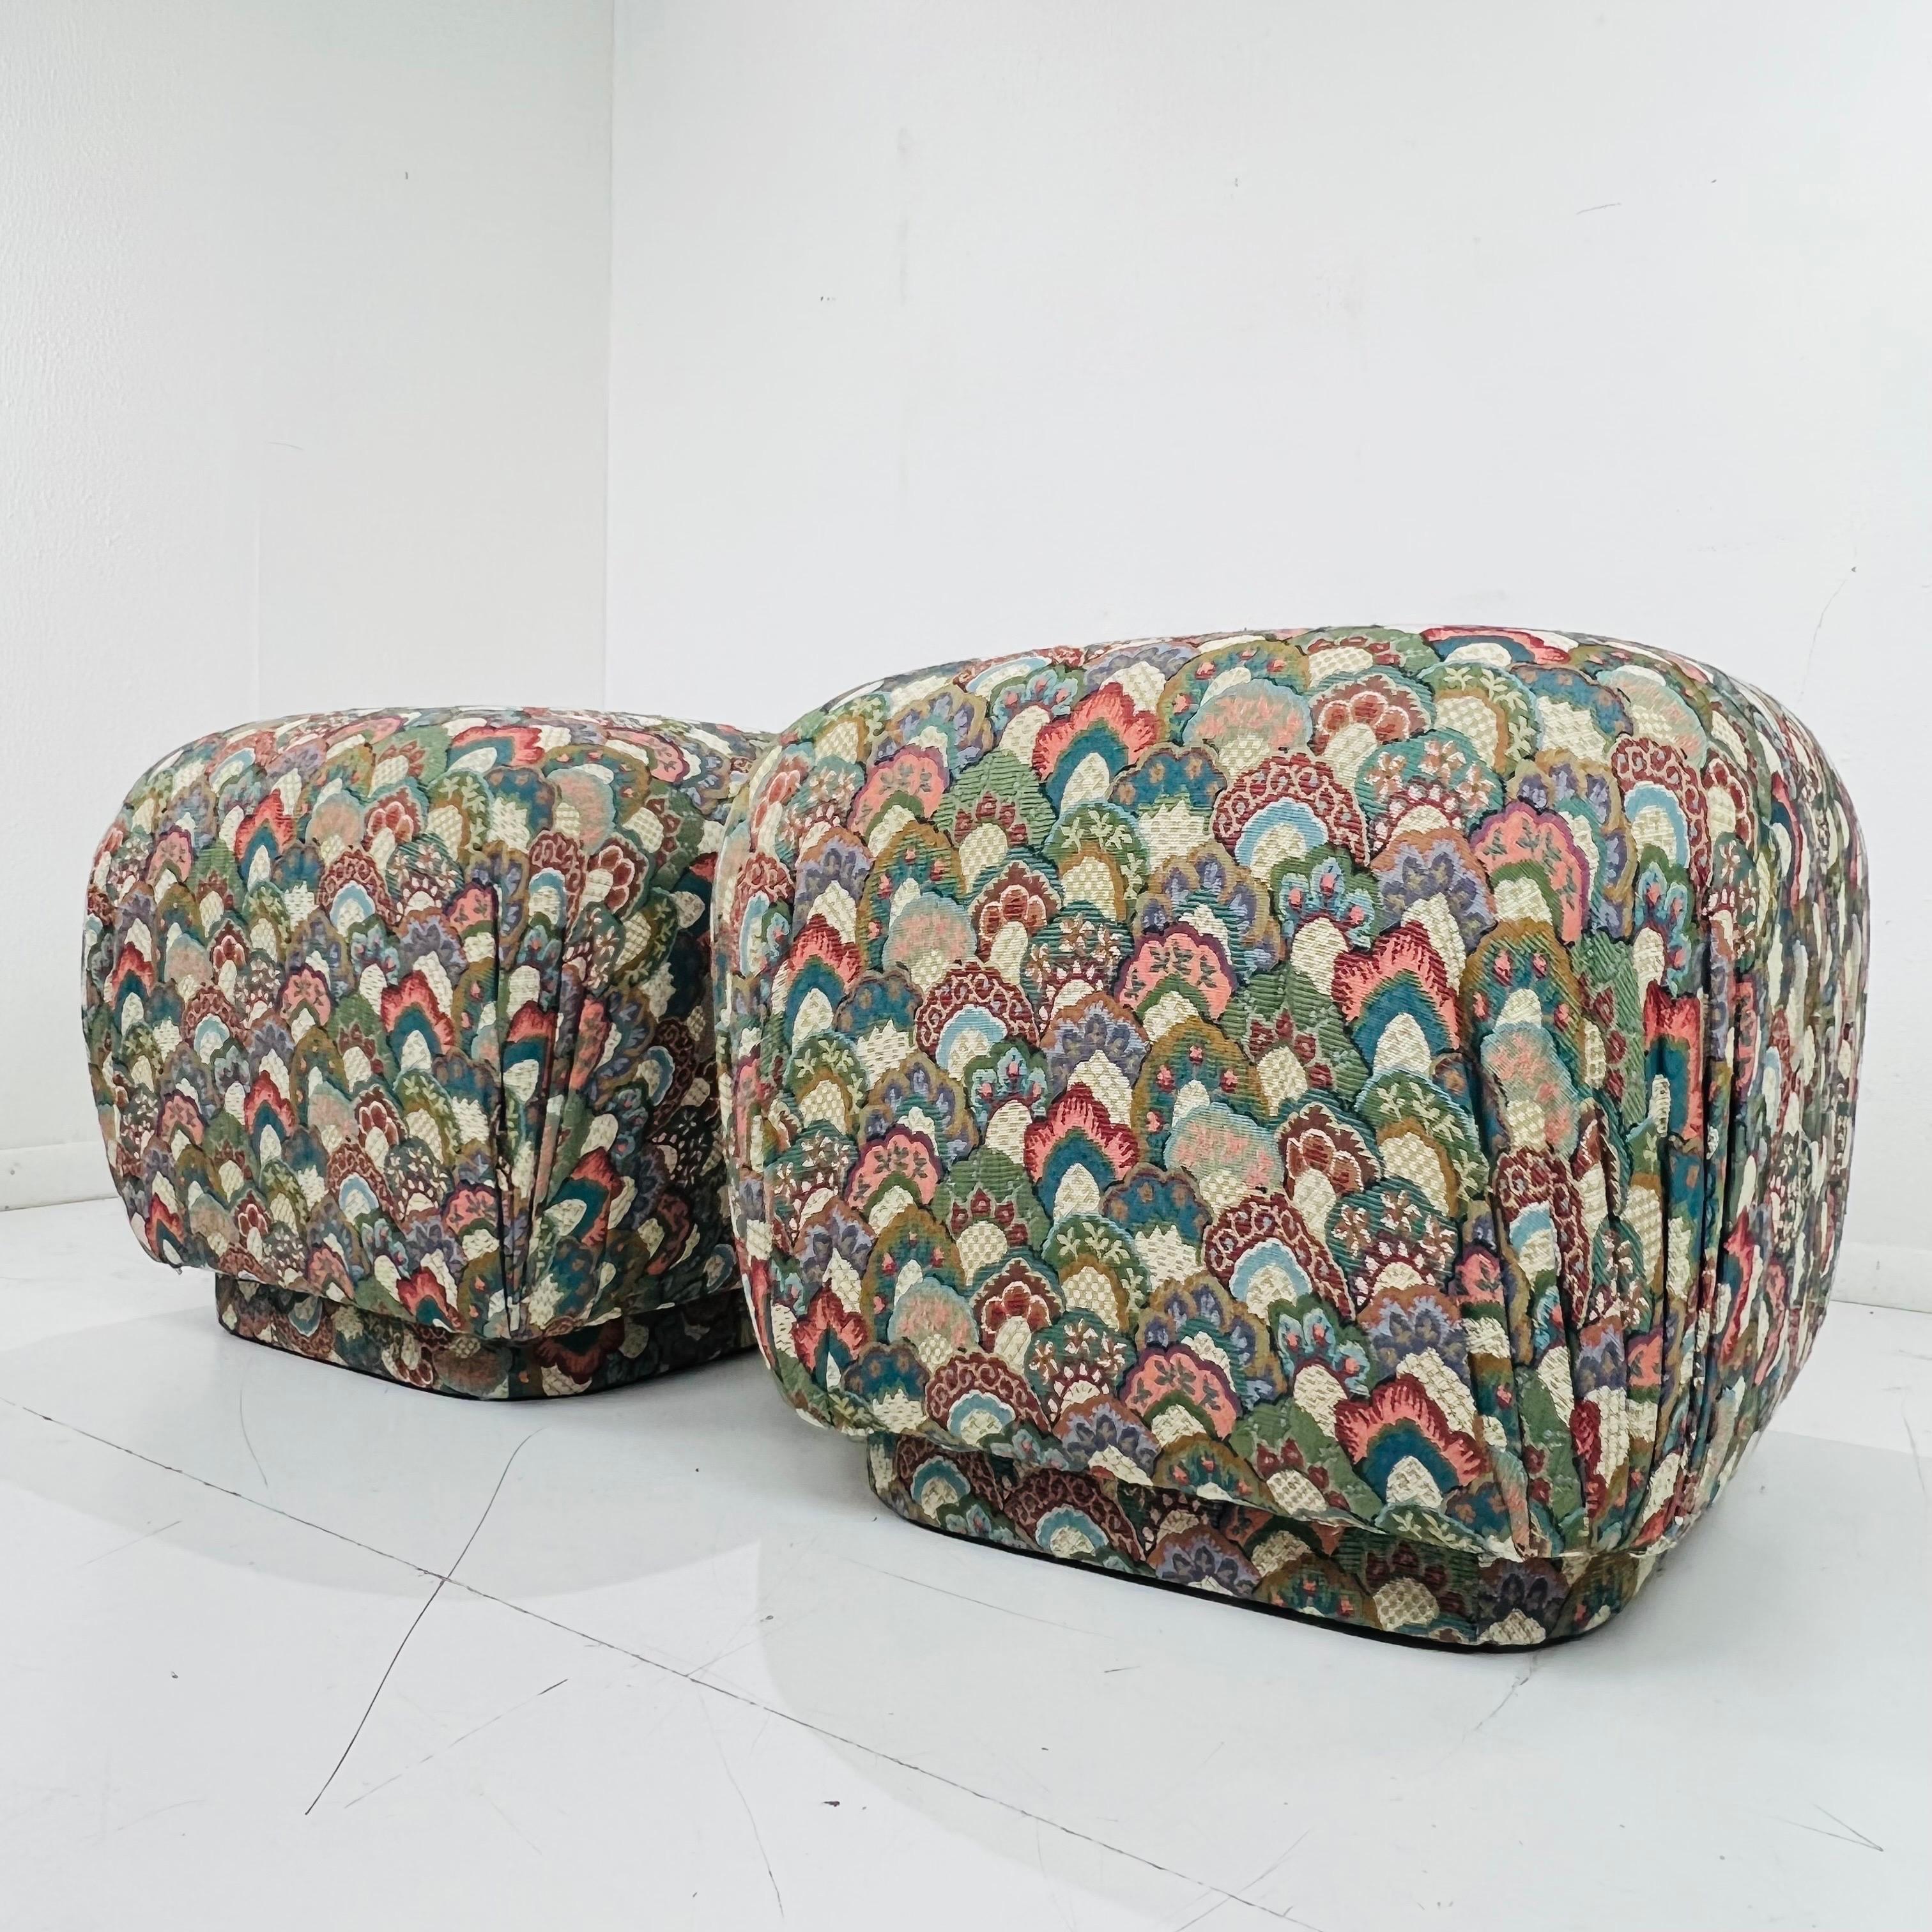 Pair of Postmodern Pouf ottomans in the style of Karl Springer. Heavy and comfortable, very good condition. 